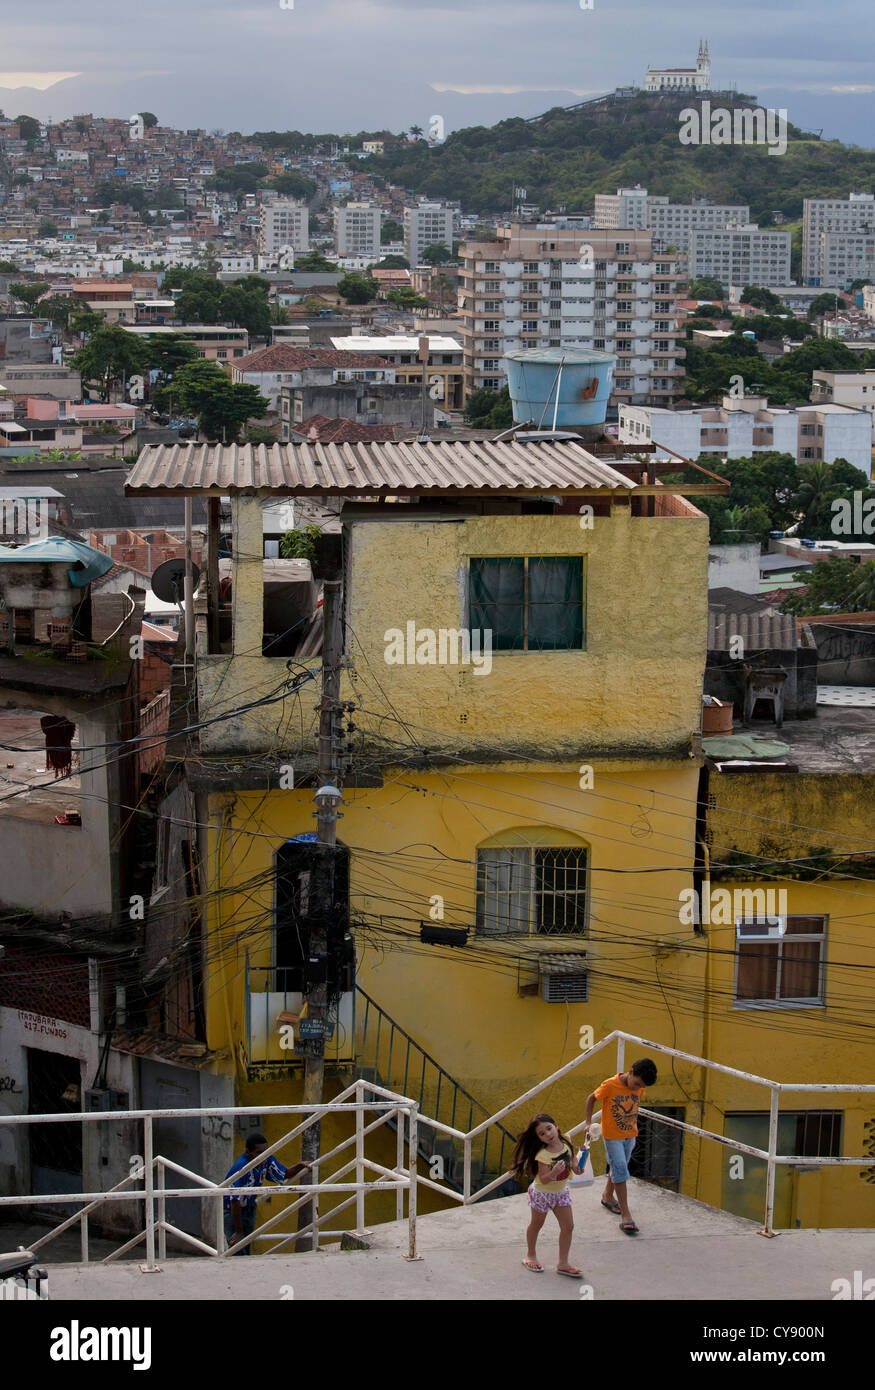 View from Baiana hill in the Complexo do Alemão Favela, with Penha Church in the background, Rio de Janeiro Brazil Stock Photo